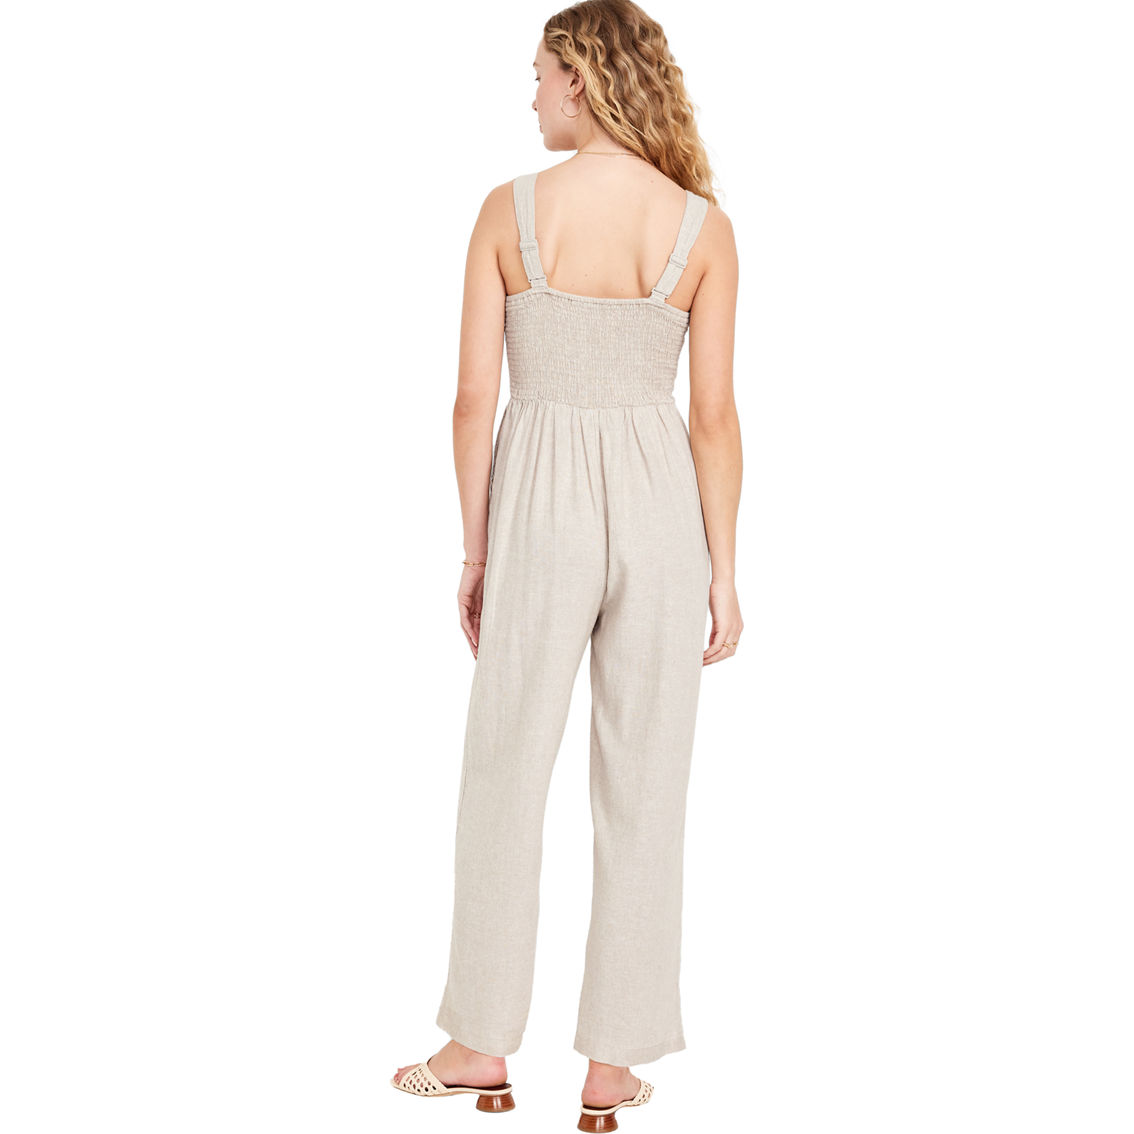 Old Navy Fit and Flare Cami Jumpsuit - Image 2 of 3